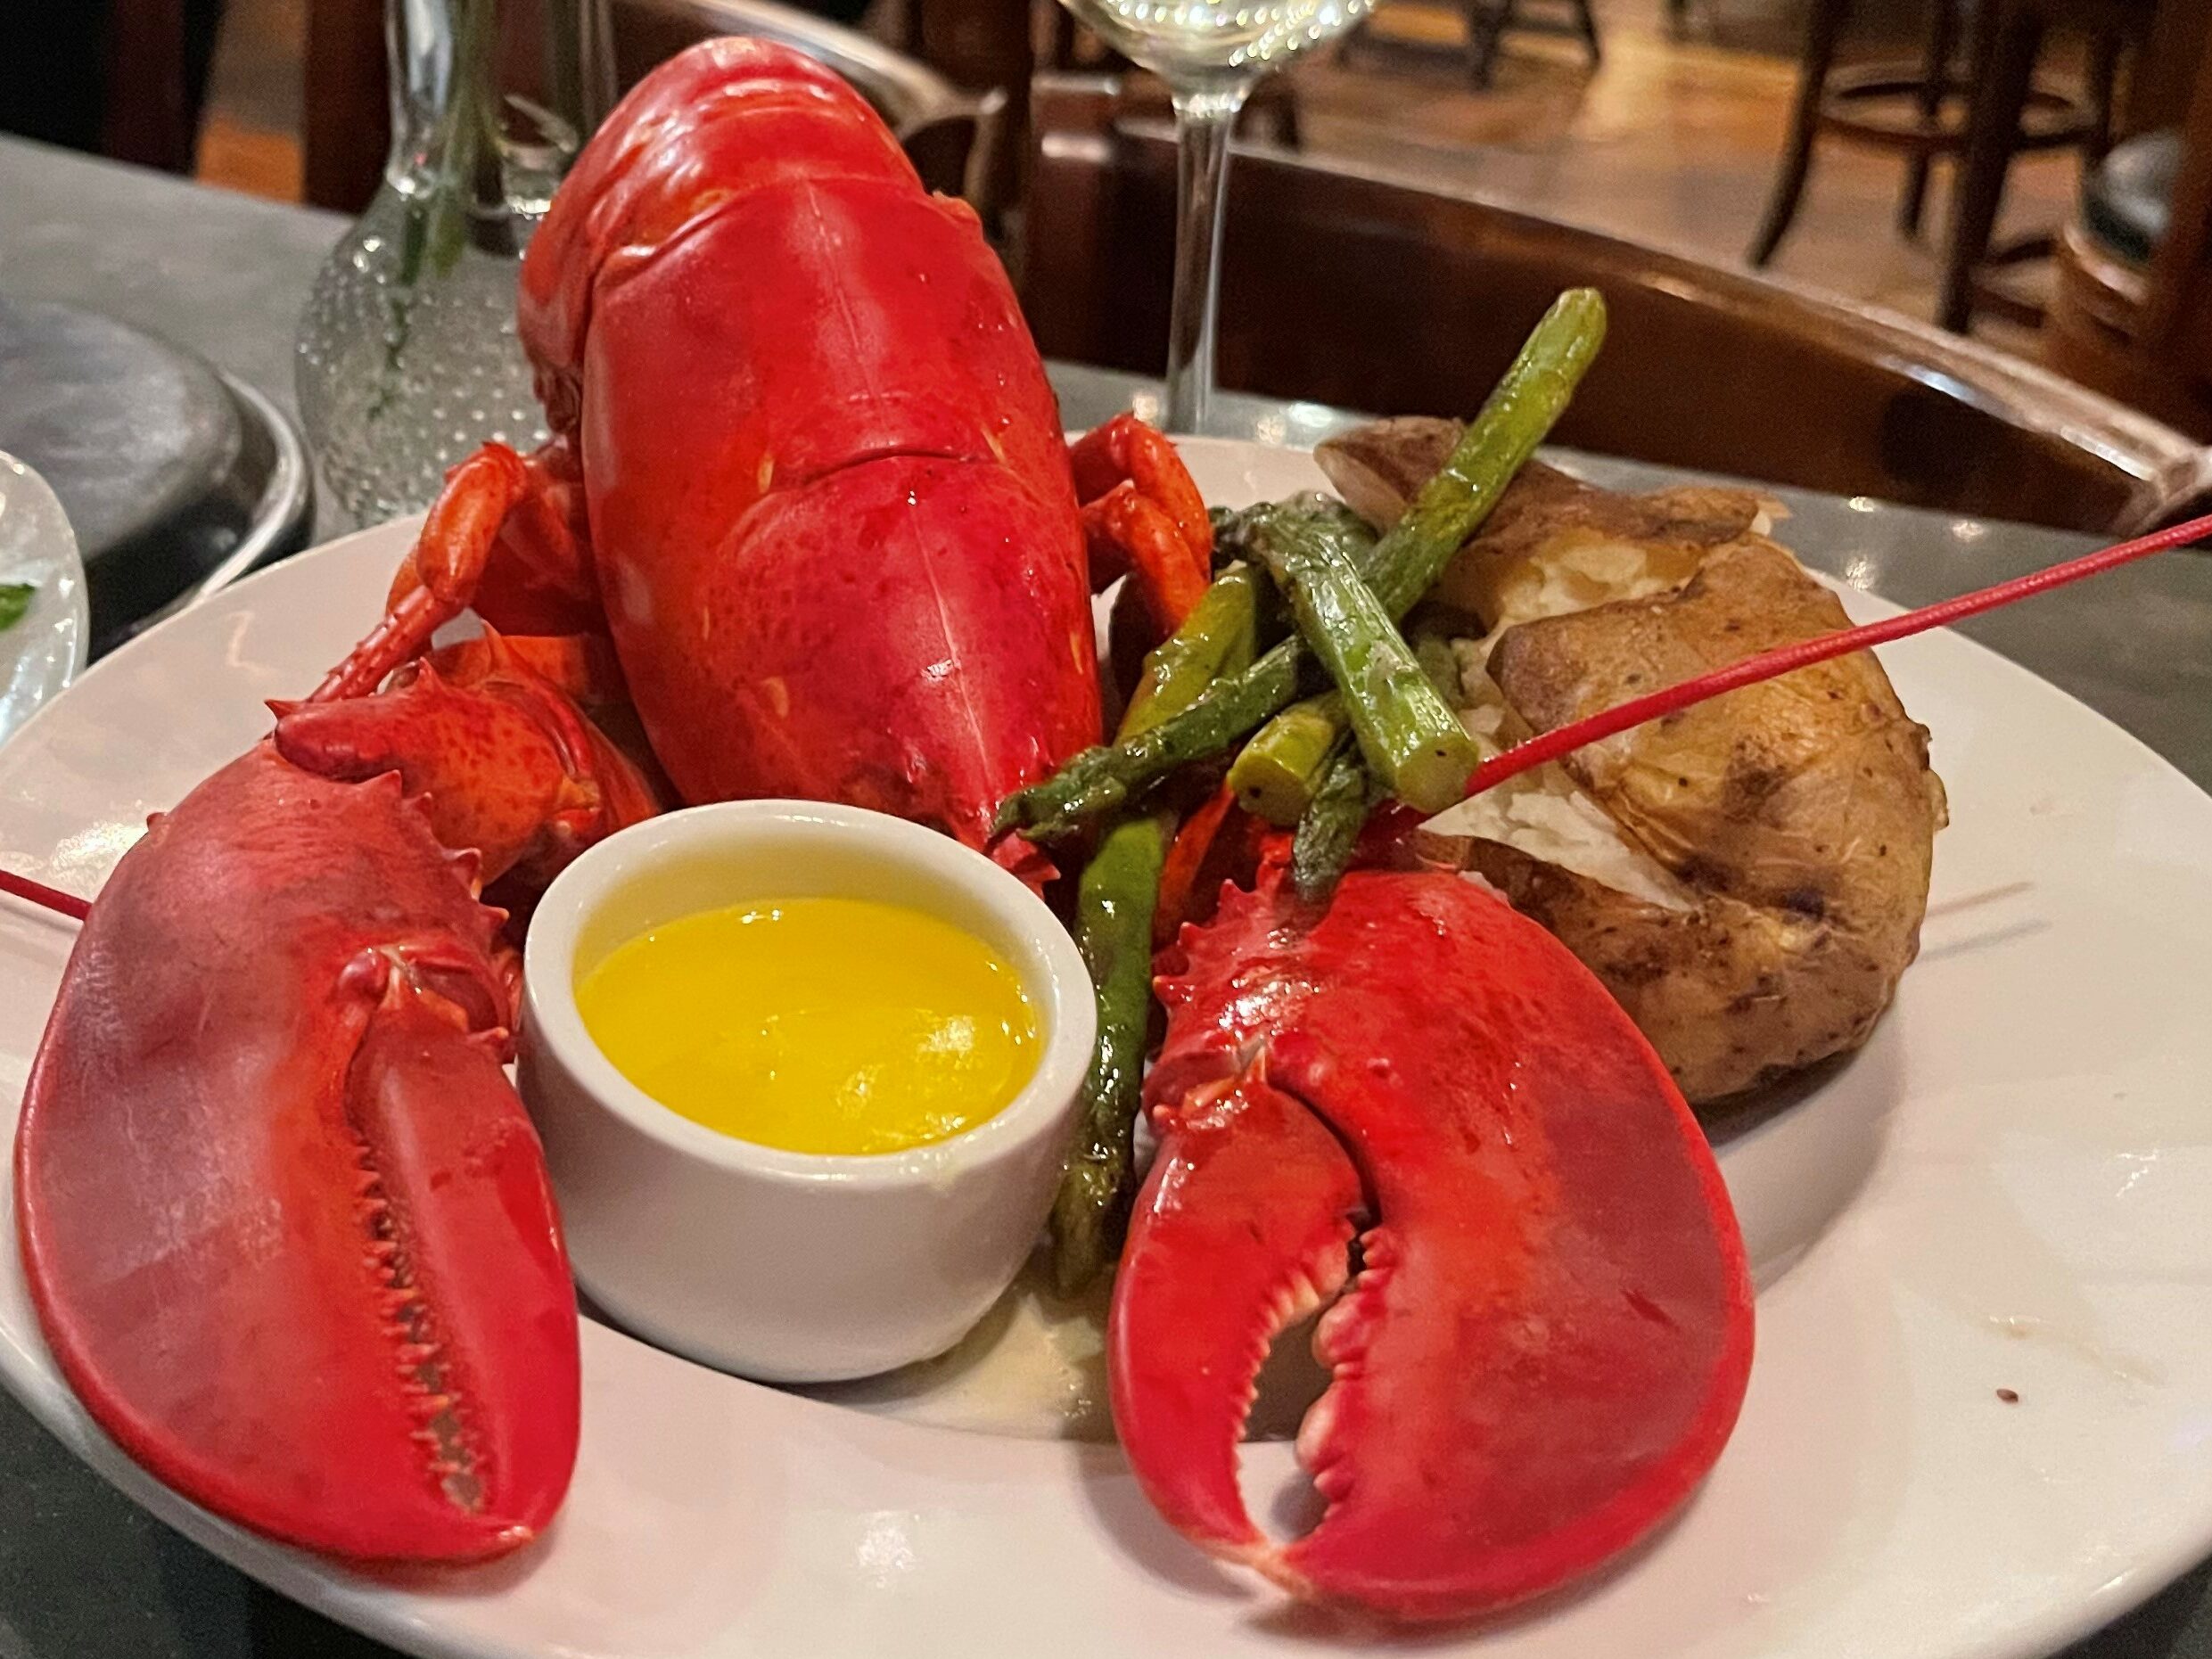 Lobster Dinner, Photo Credit: Boones Fish House & Oyster Room